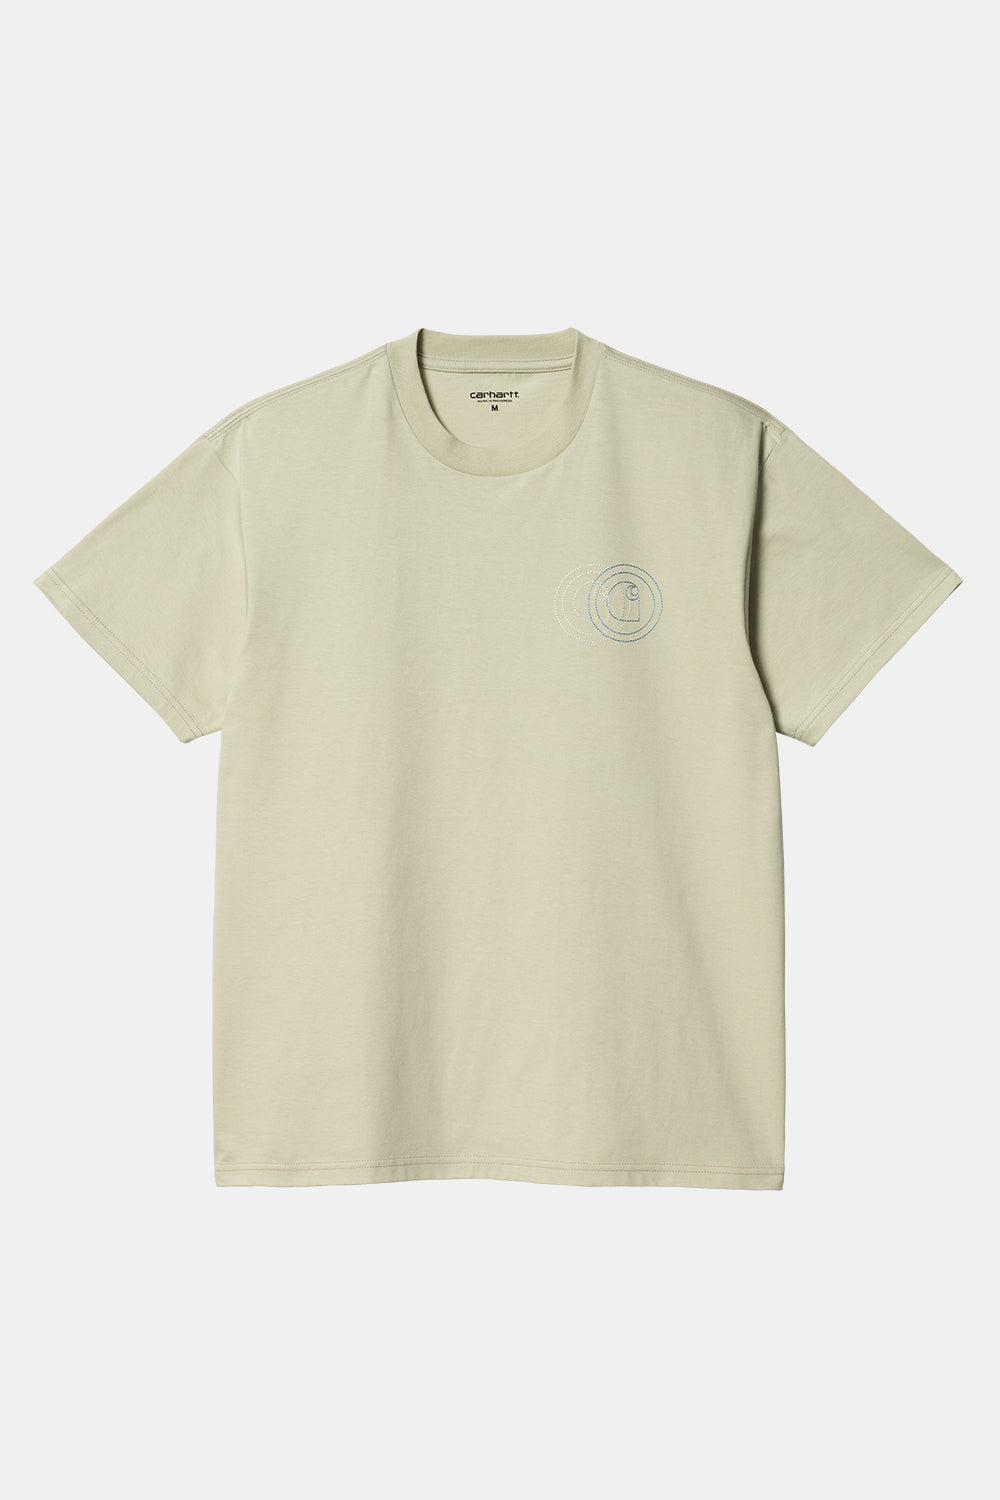 Carhartt WIP Short Sleeved Embroidered Duel T-Shirt (Agave Green)